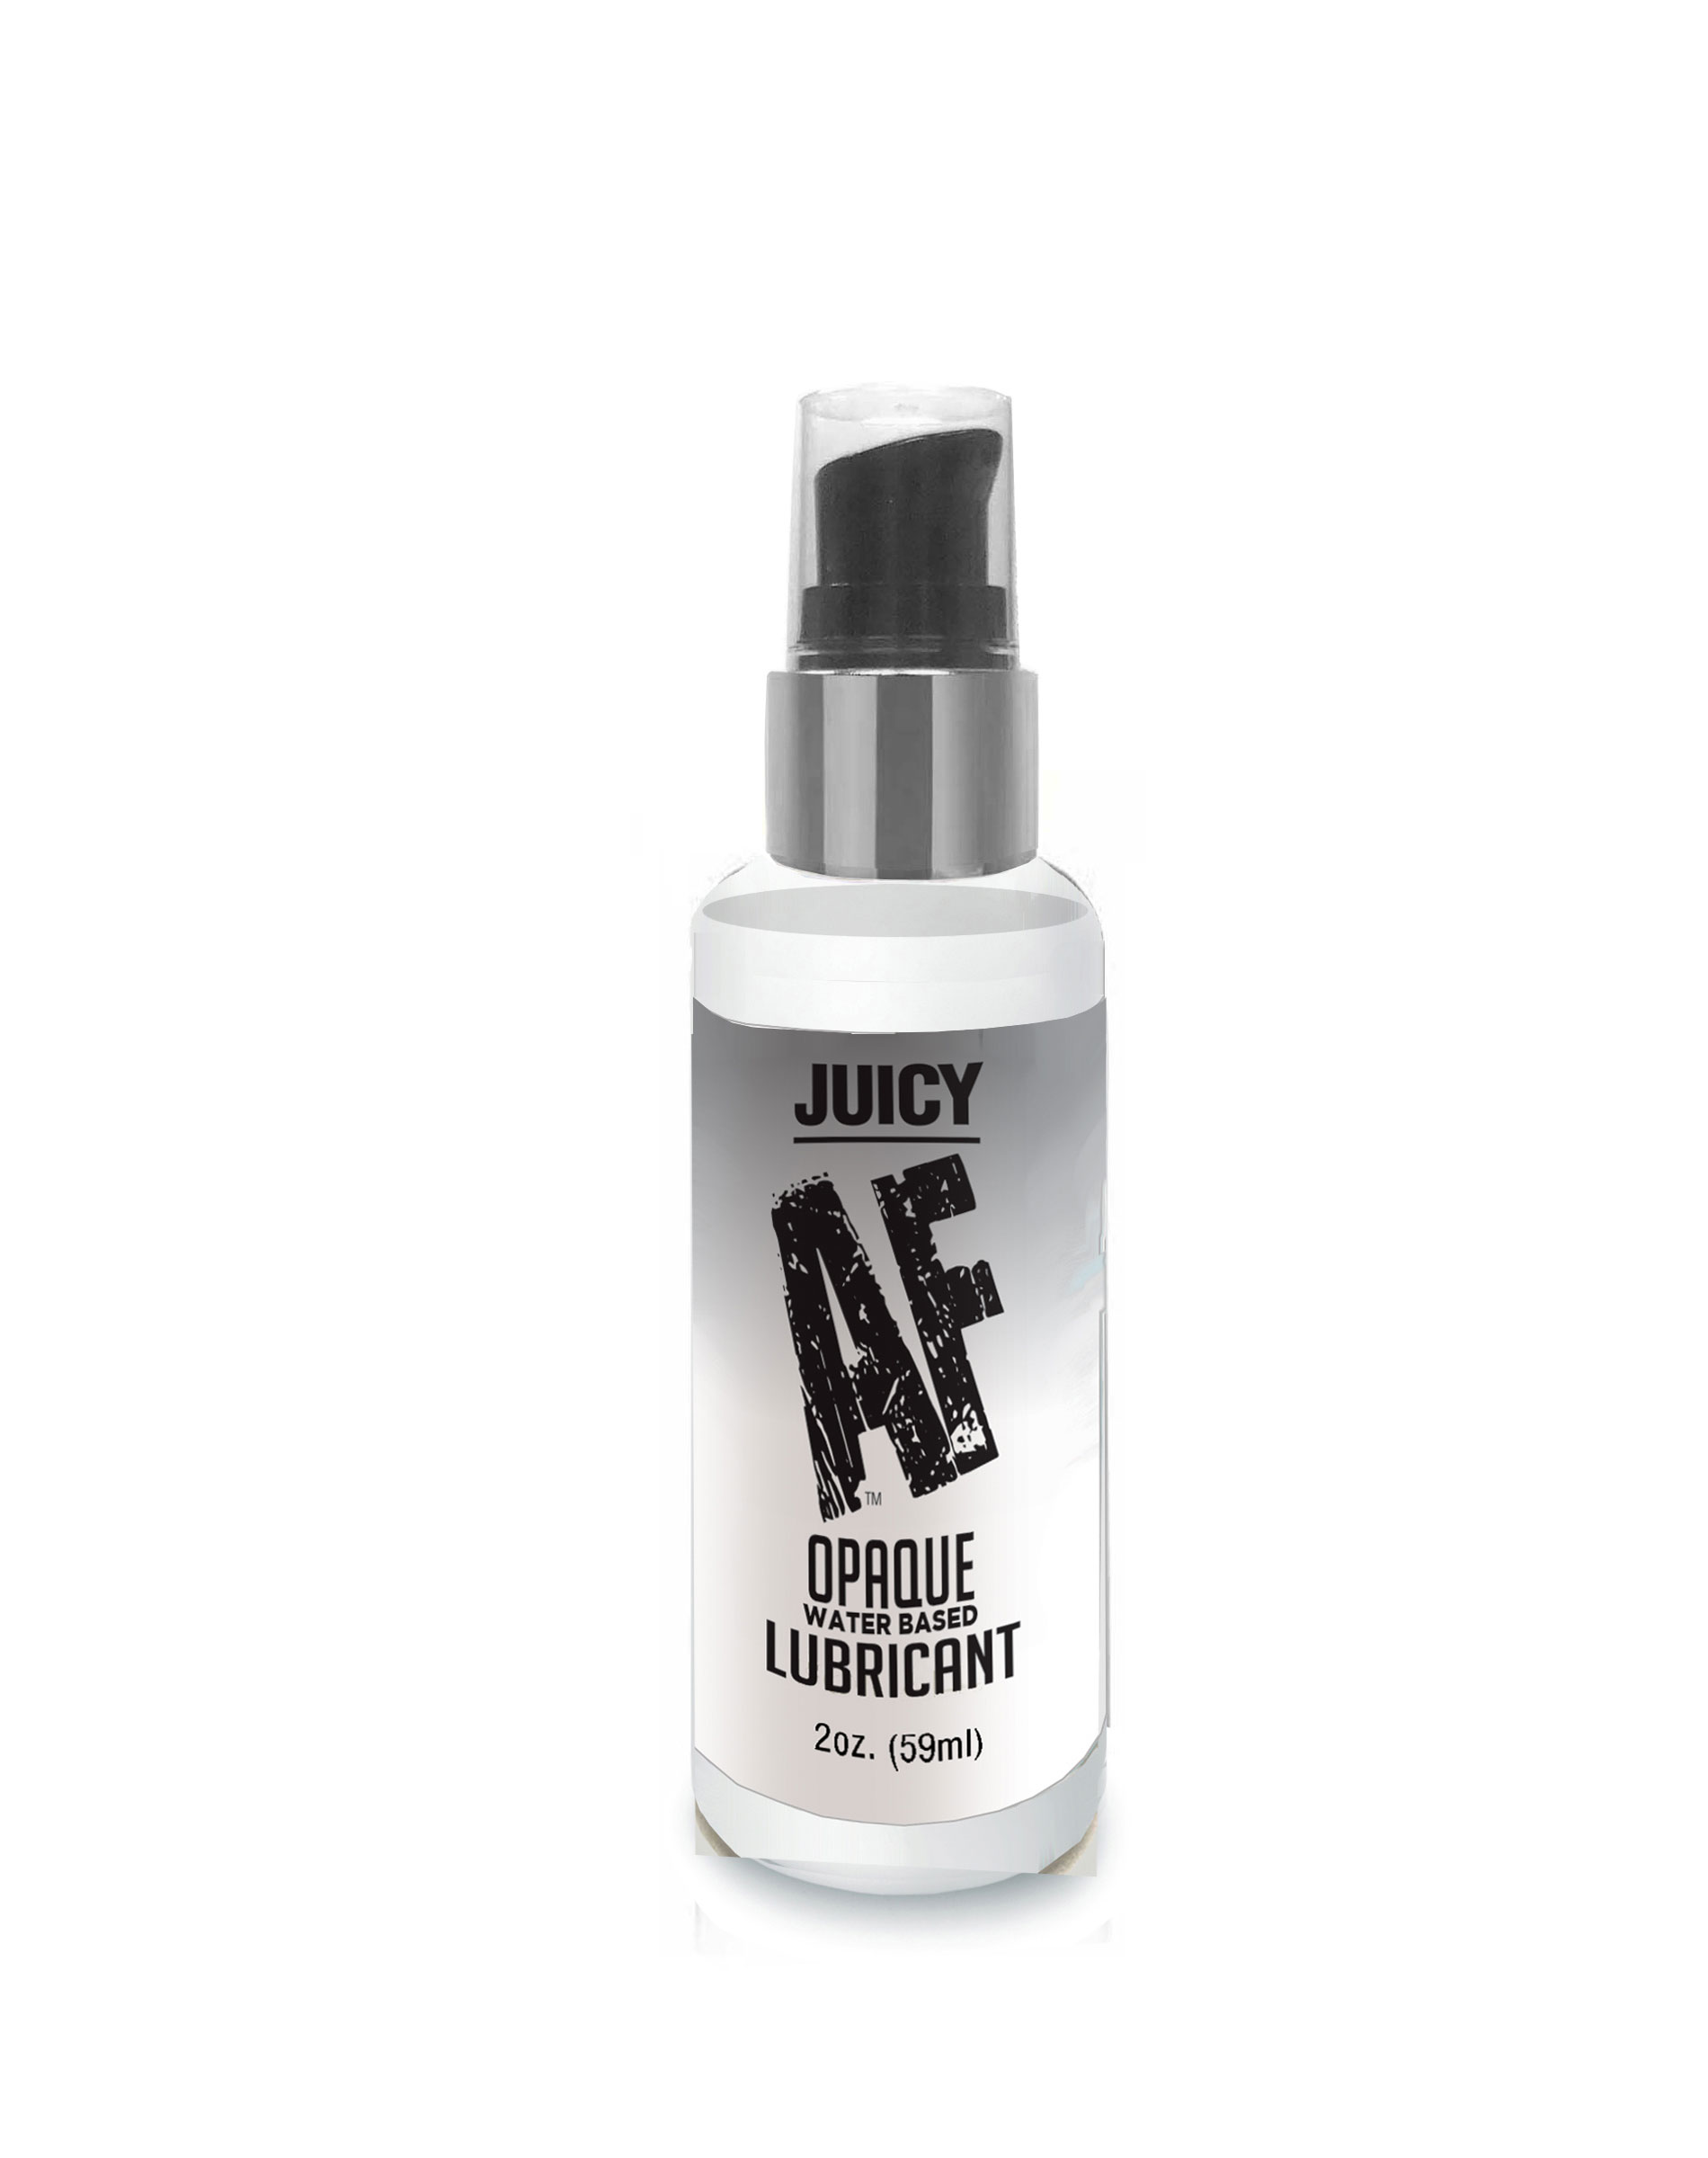 juicy af water based creamy white opaque lubricant  oz 